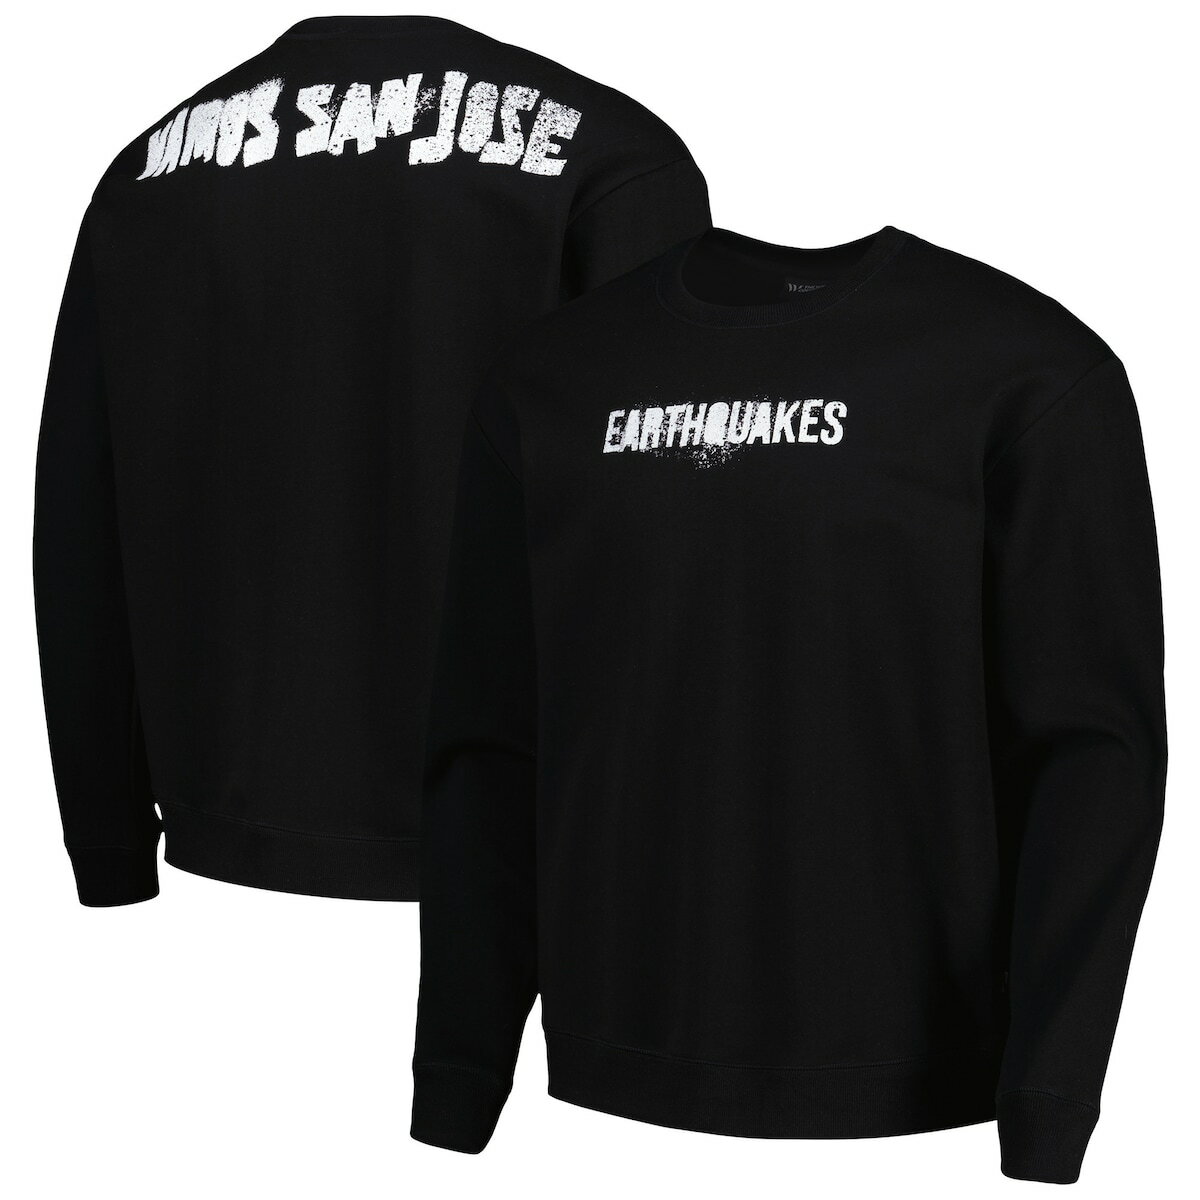 Get ready to cheer on the San Jose Earthquakes by picking up this pullover sweatshirt from The Wild Collective. It featu...